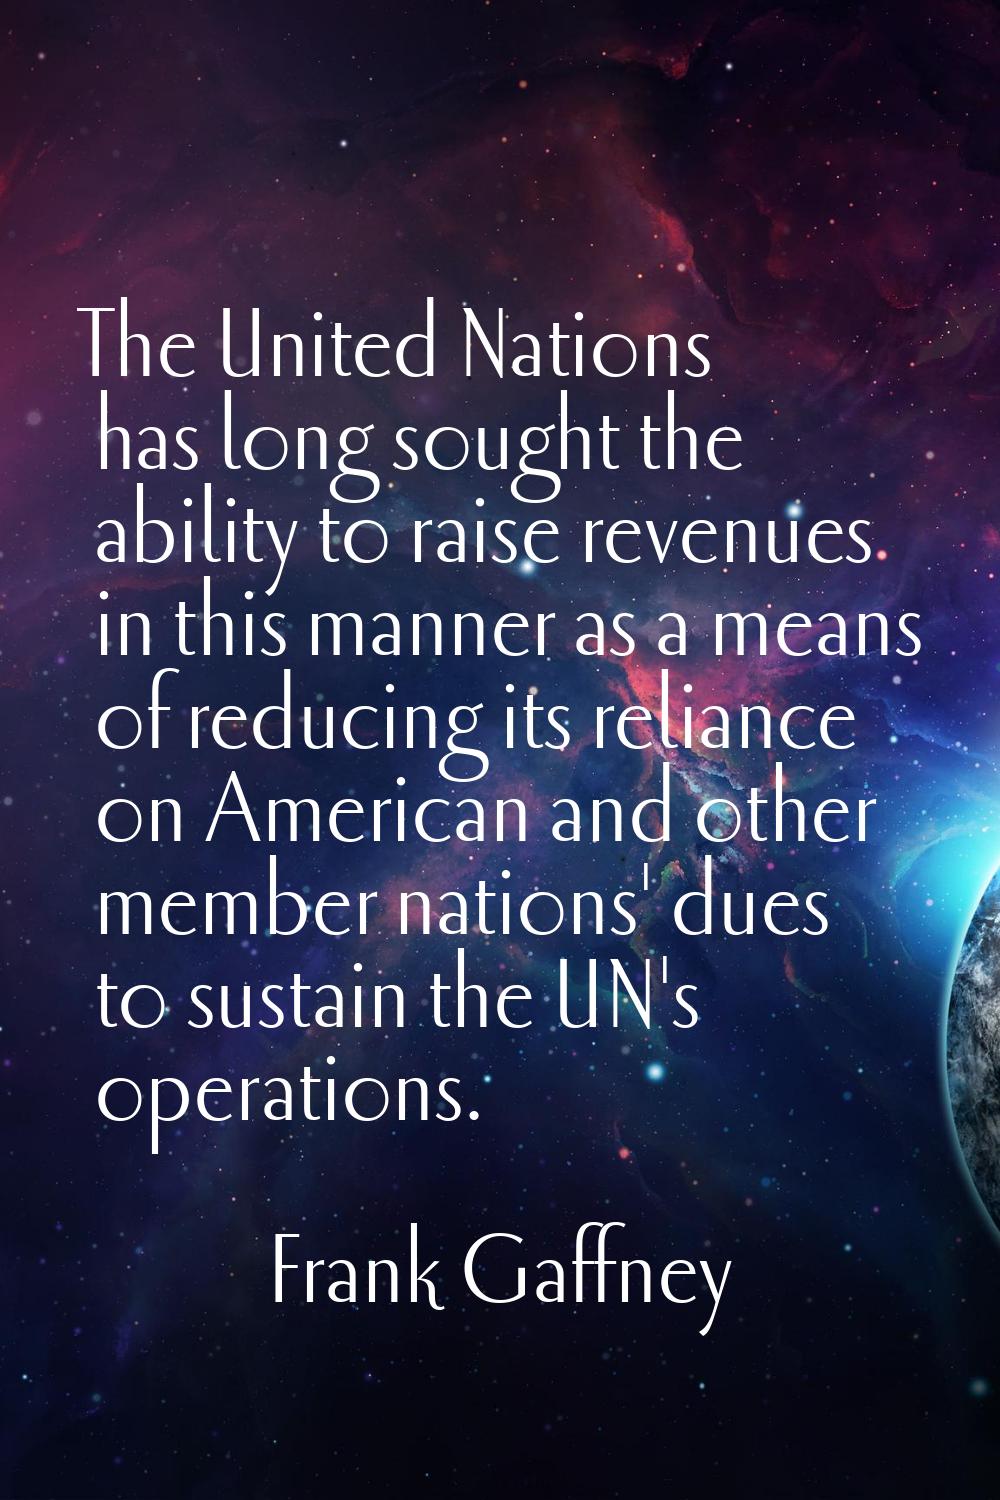 The United Nations has long sought the ability to raise revenues in this manner as a means of reduc